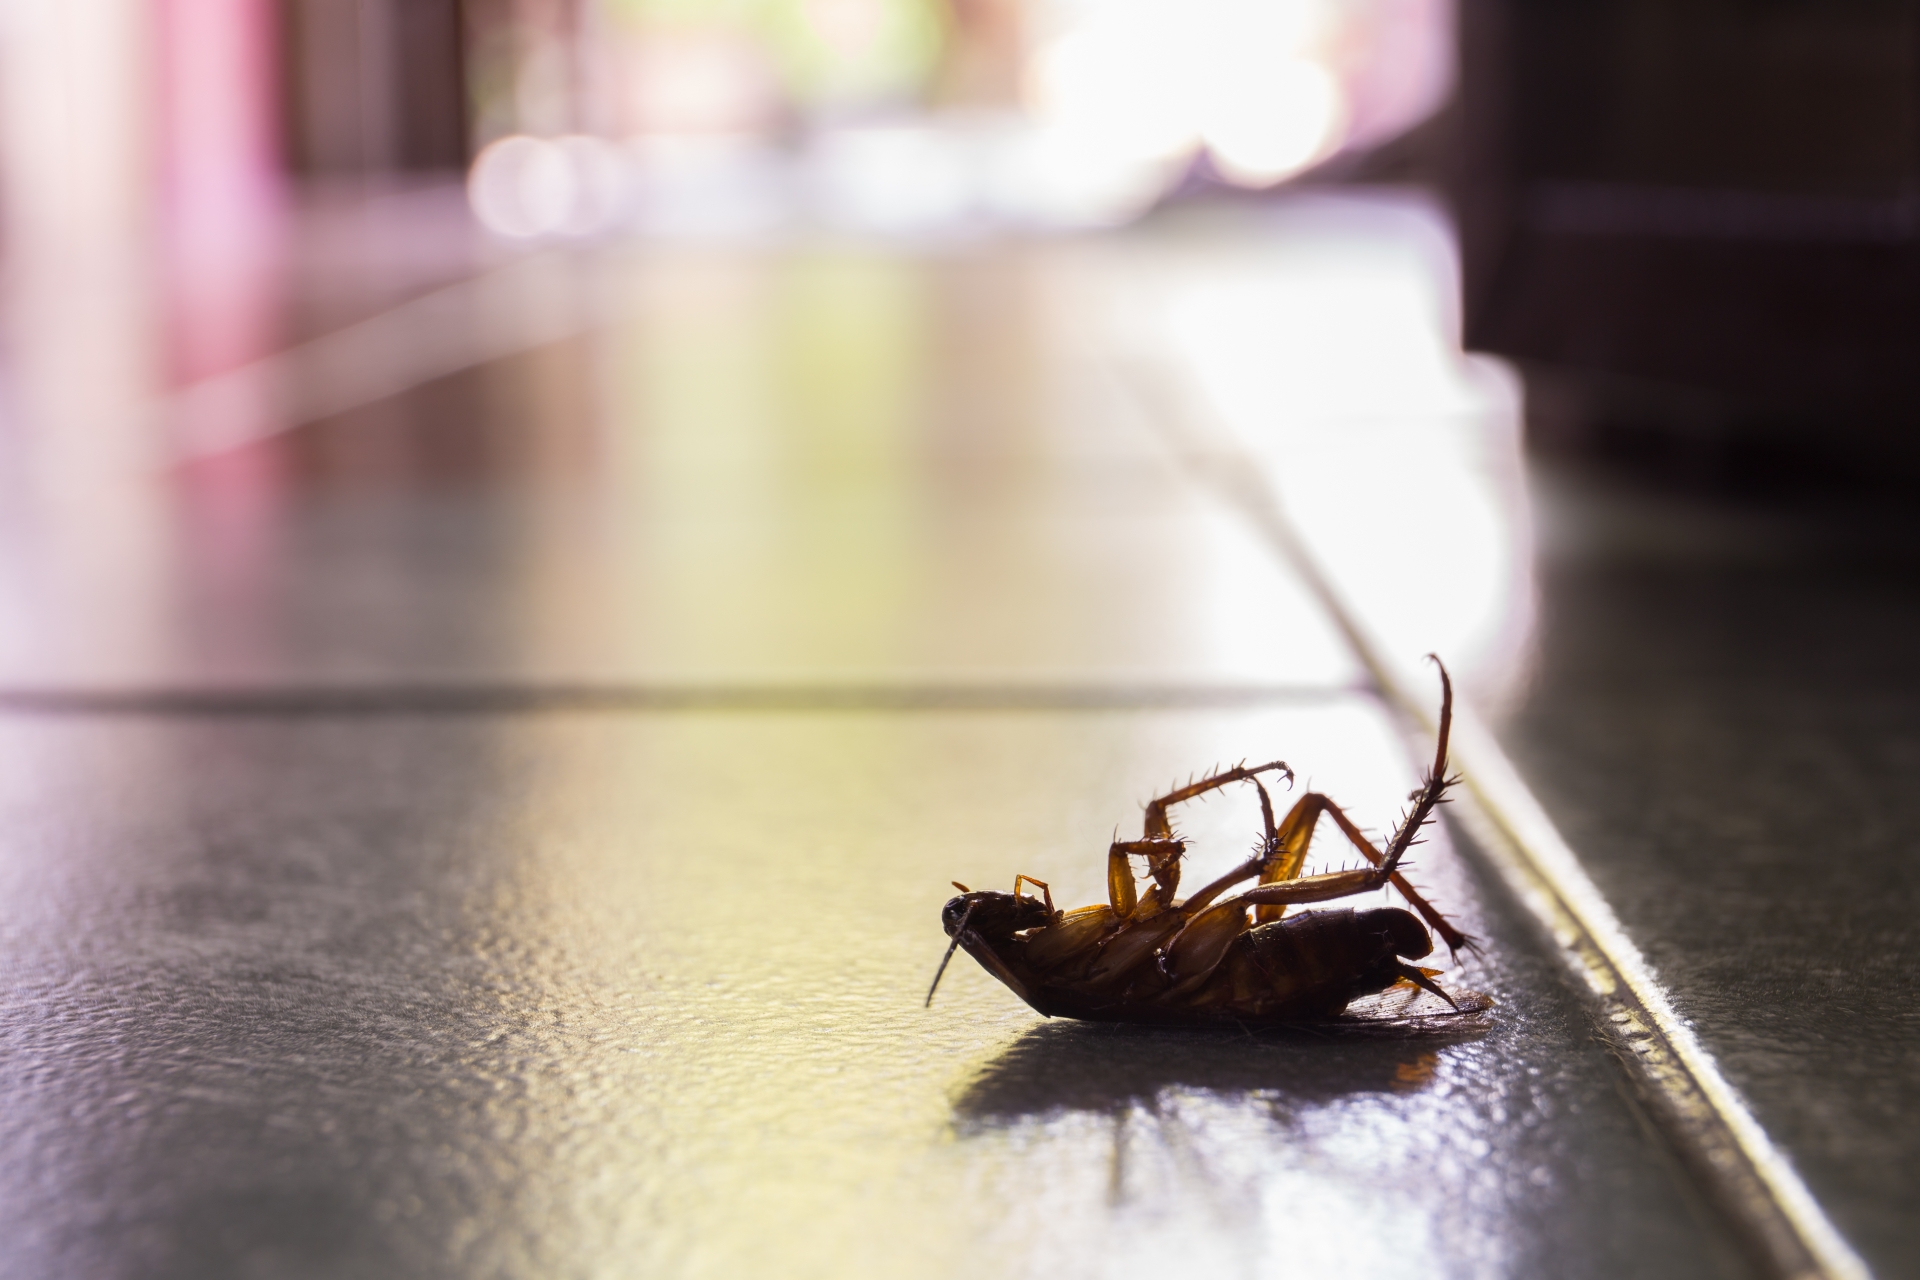 Cockroach Control, Pest Control in Dulwich, SE21. Call Now 020 8166 9746